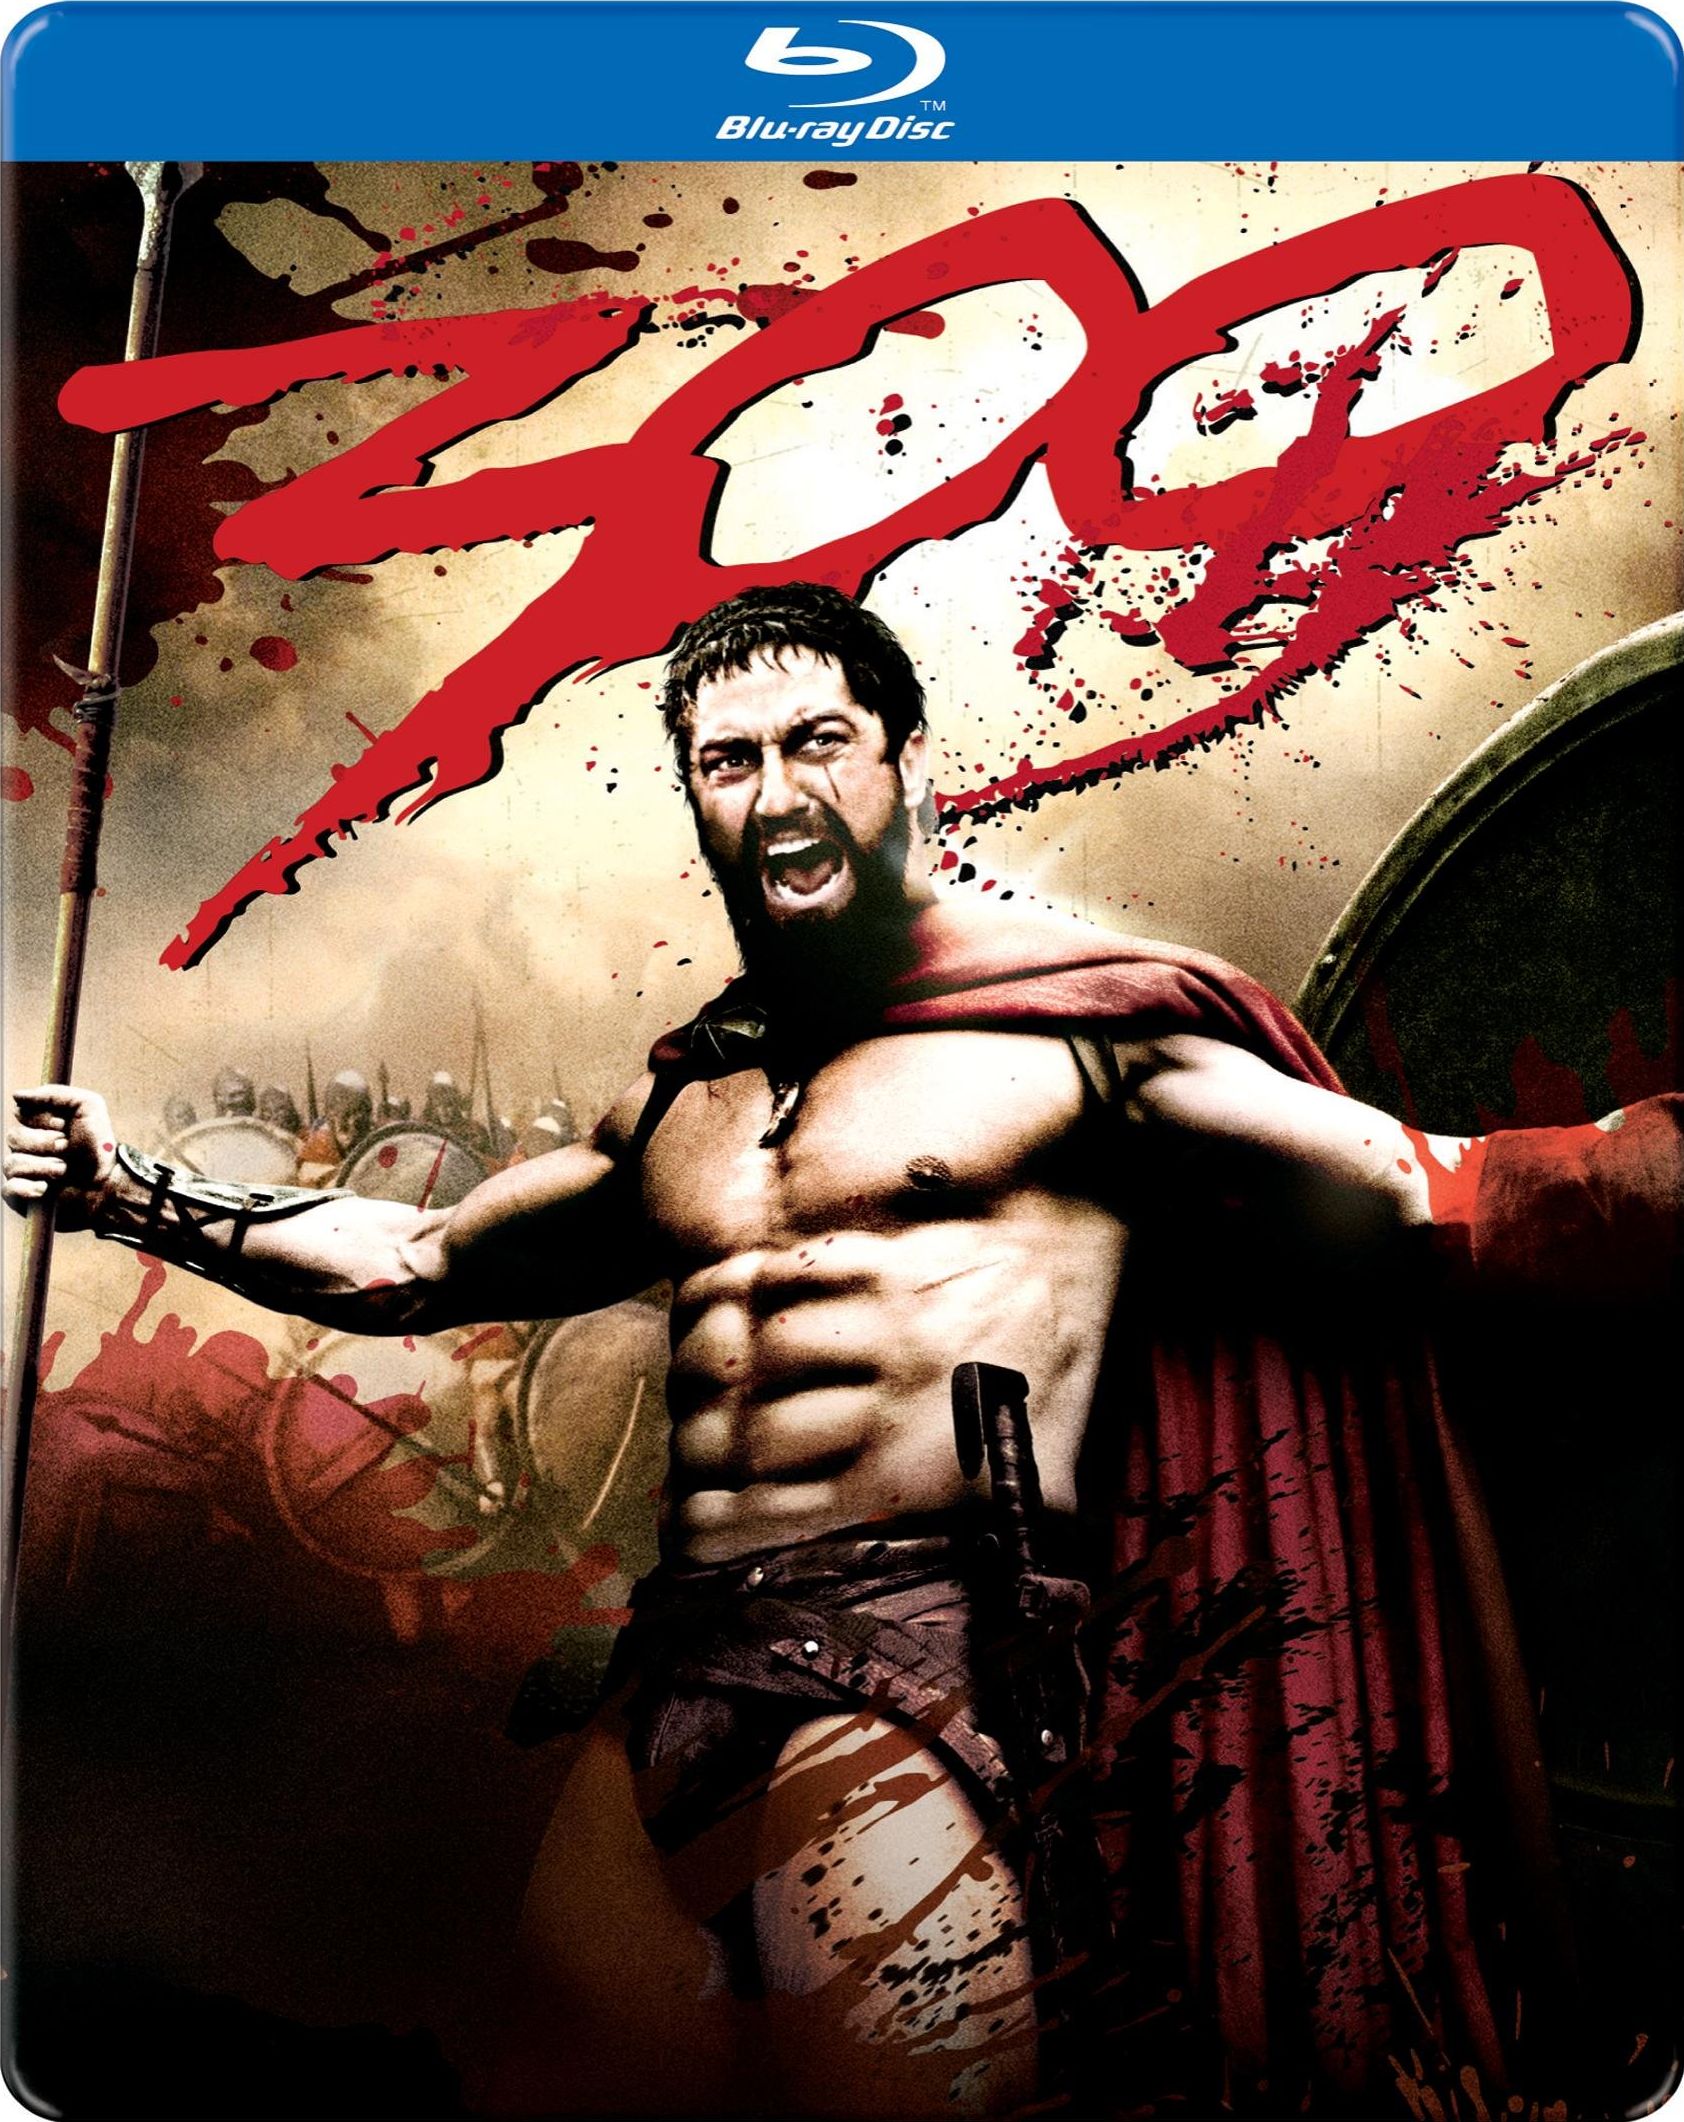 The 300 Spartans [DVD]